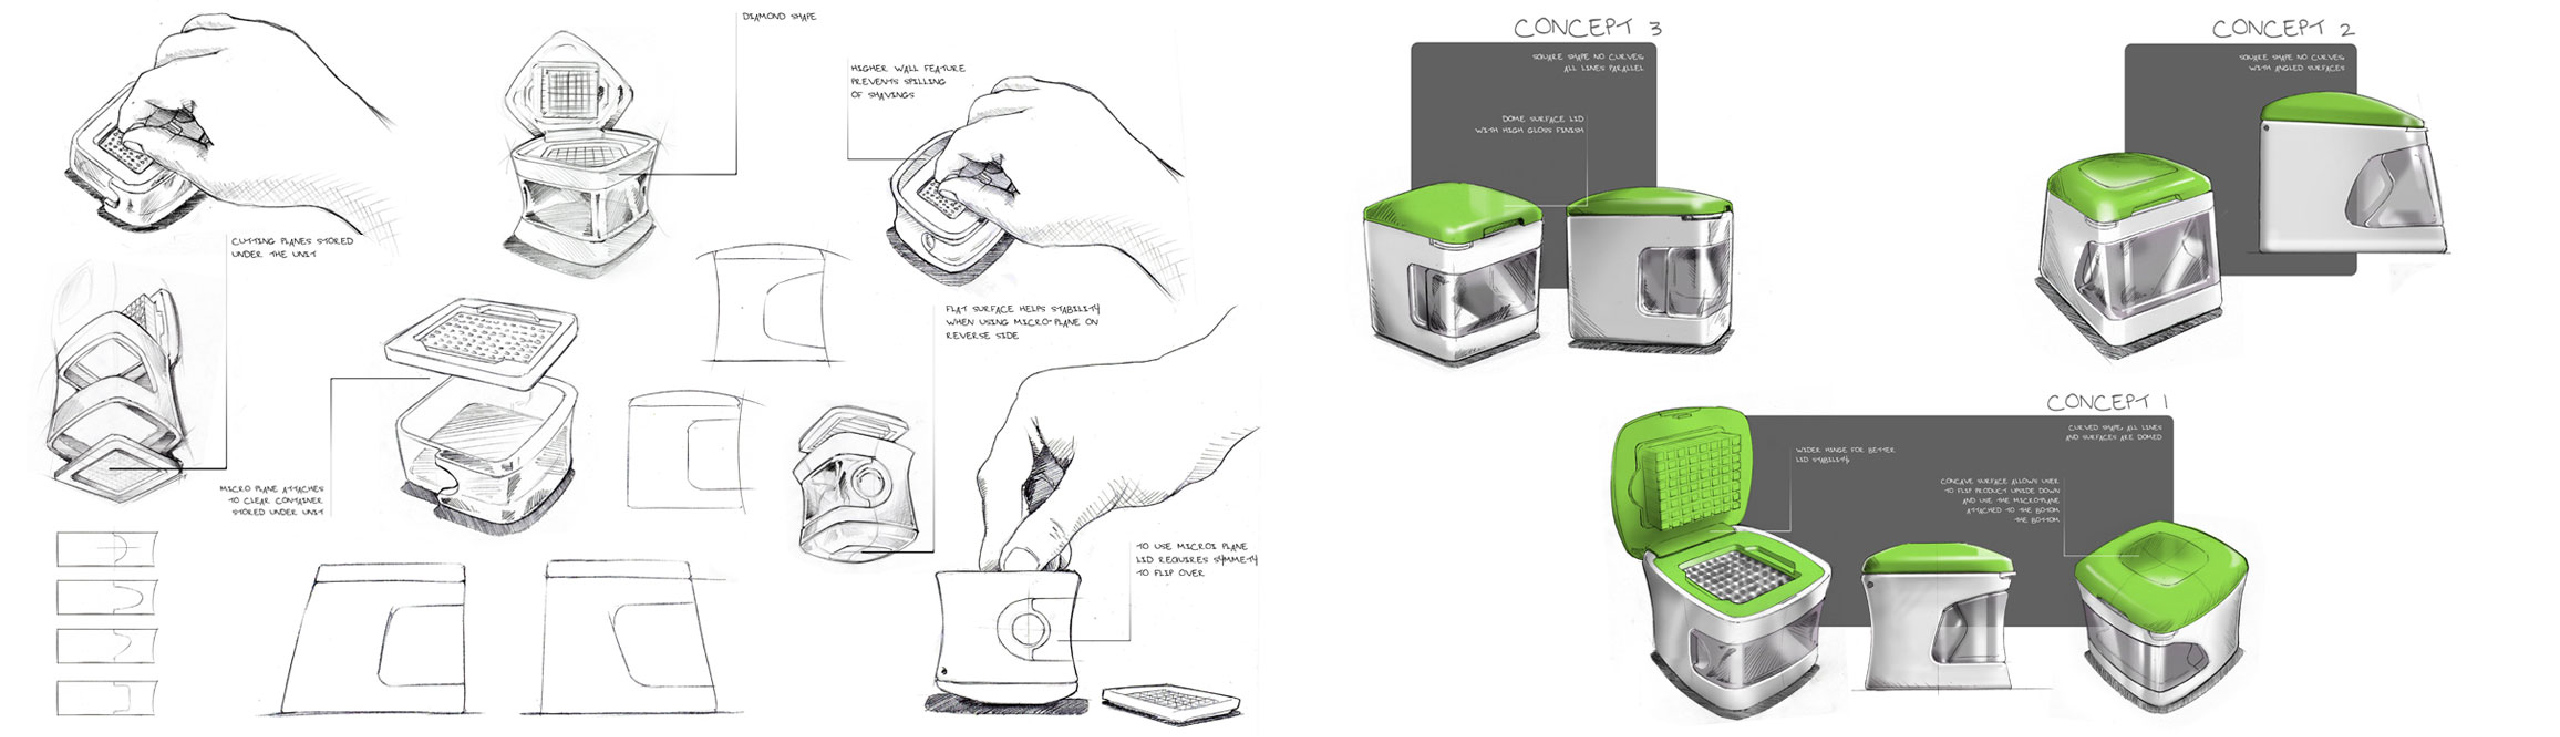 Product Styling - Garlic Press Concepts 